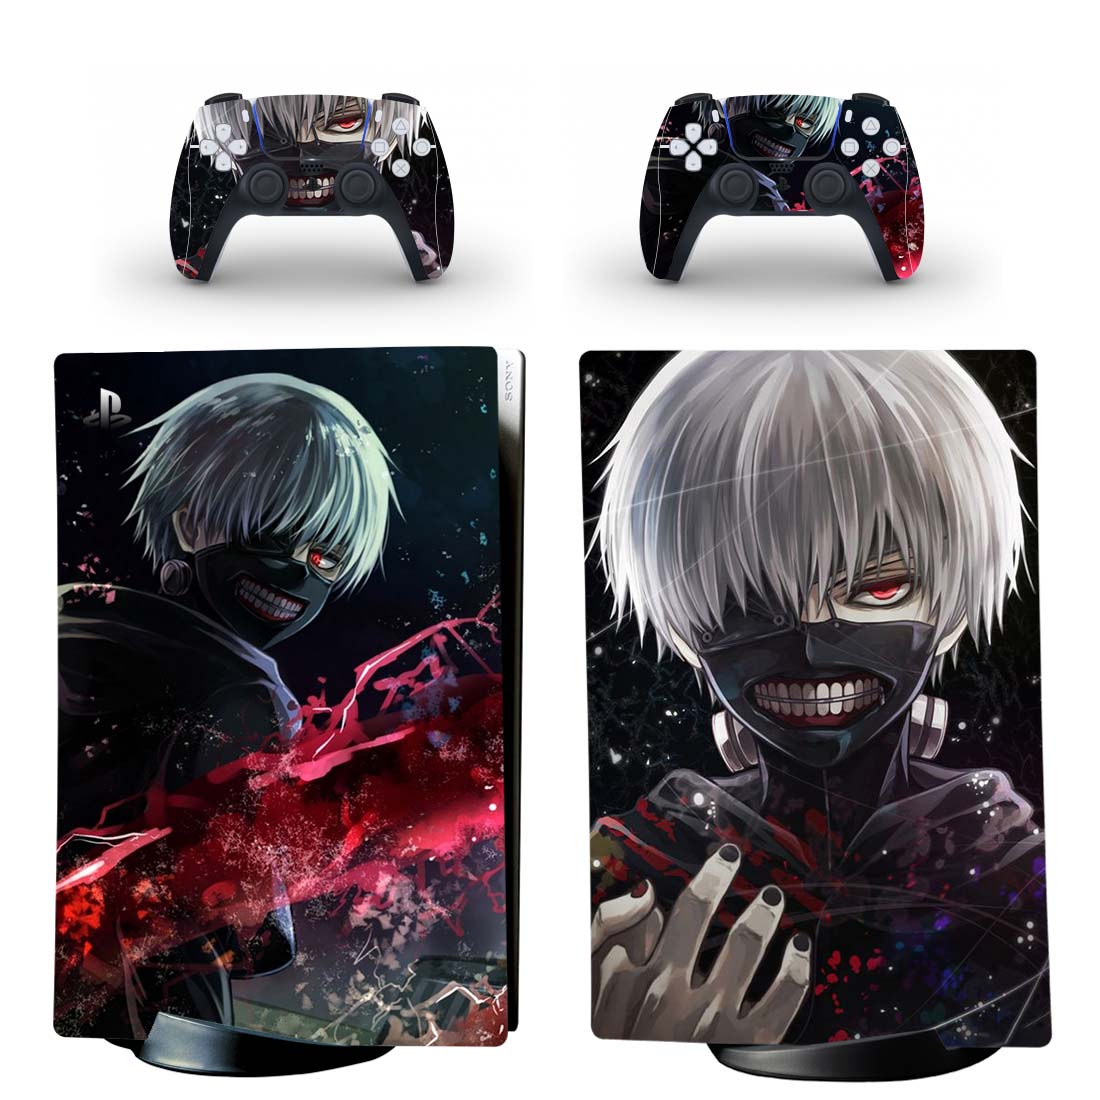 Tokyo Ghoul Skin Sticker Decal For PS5 Digital Edition And Controllers